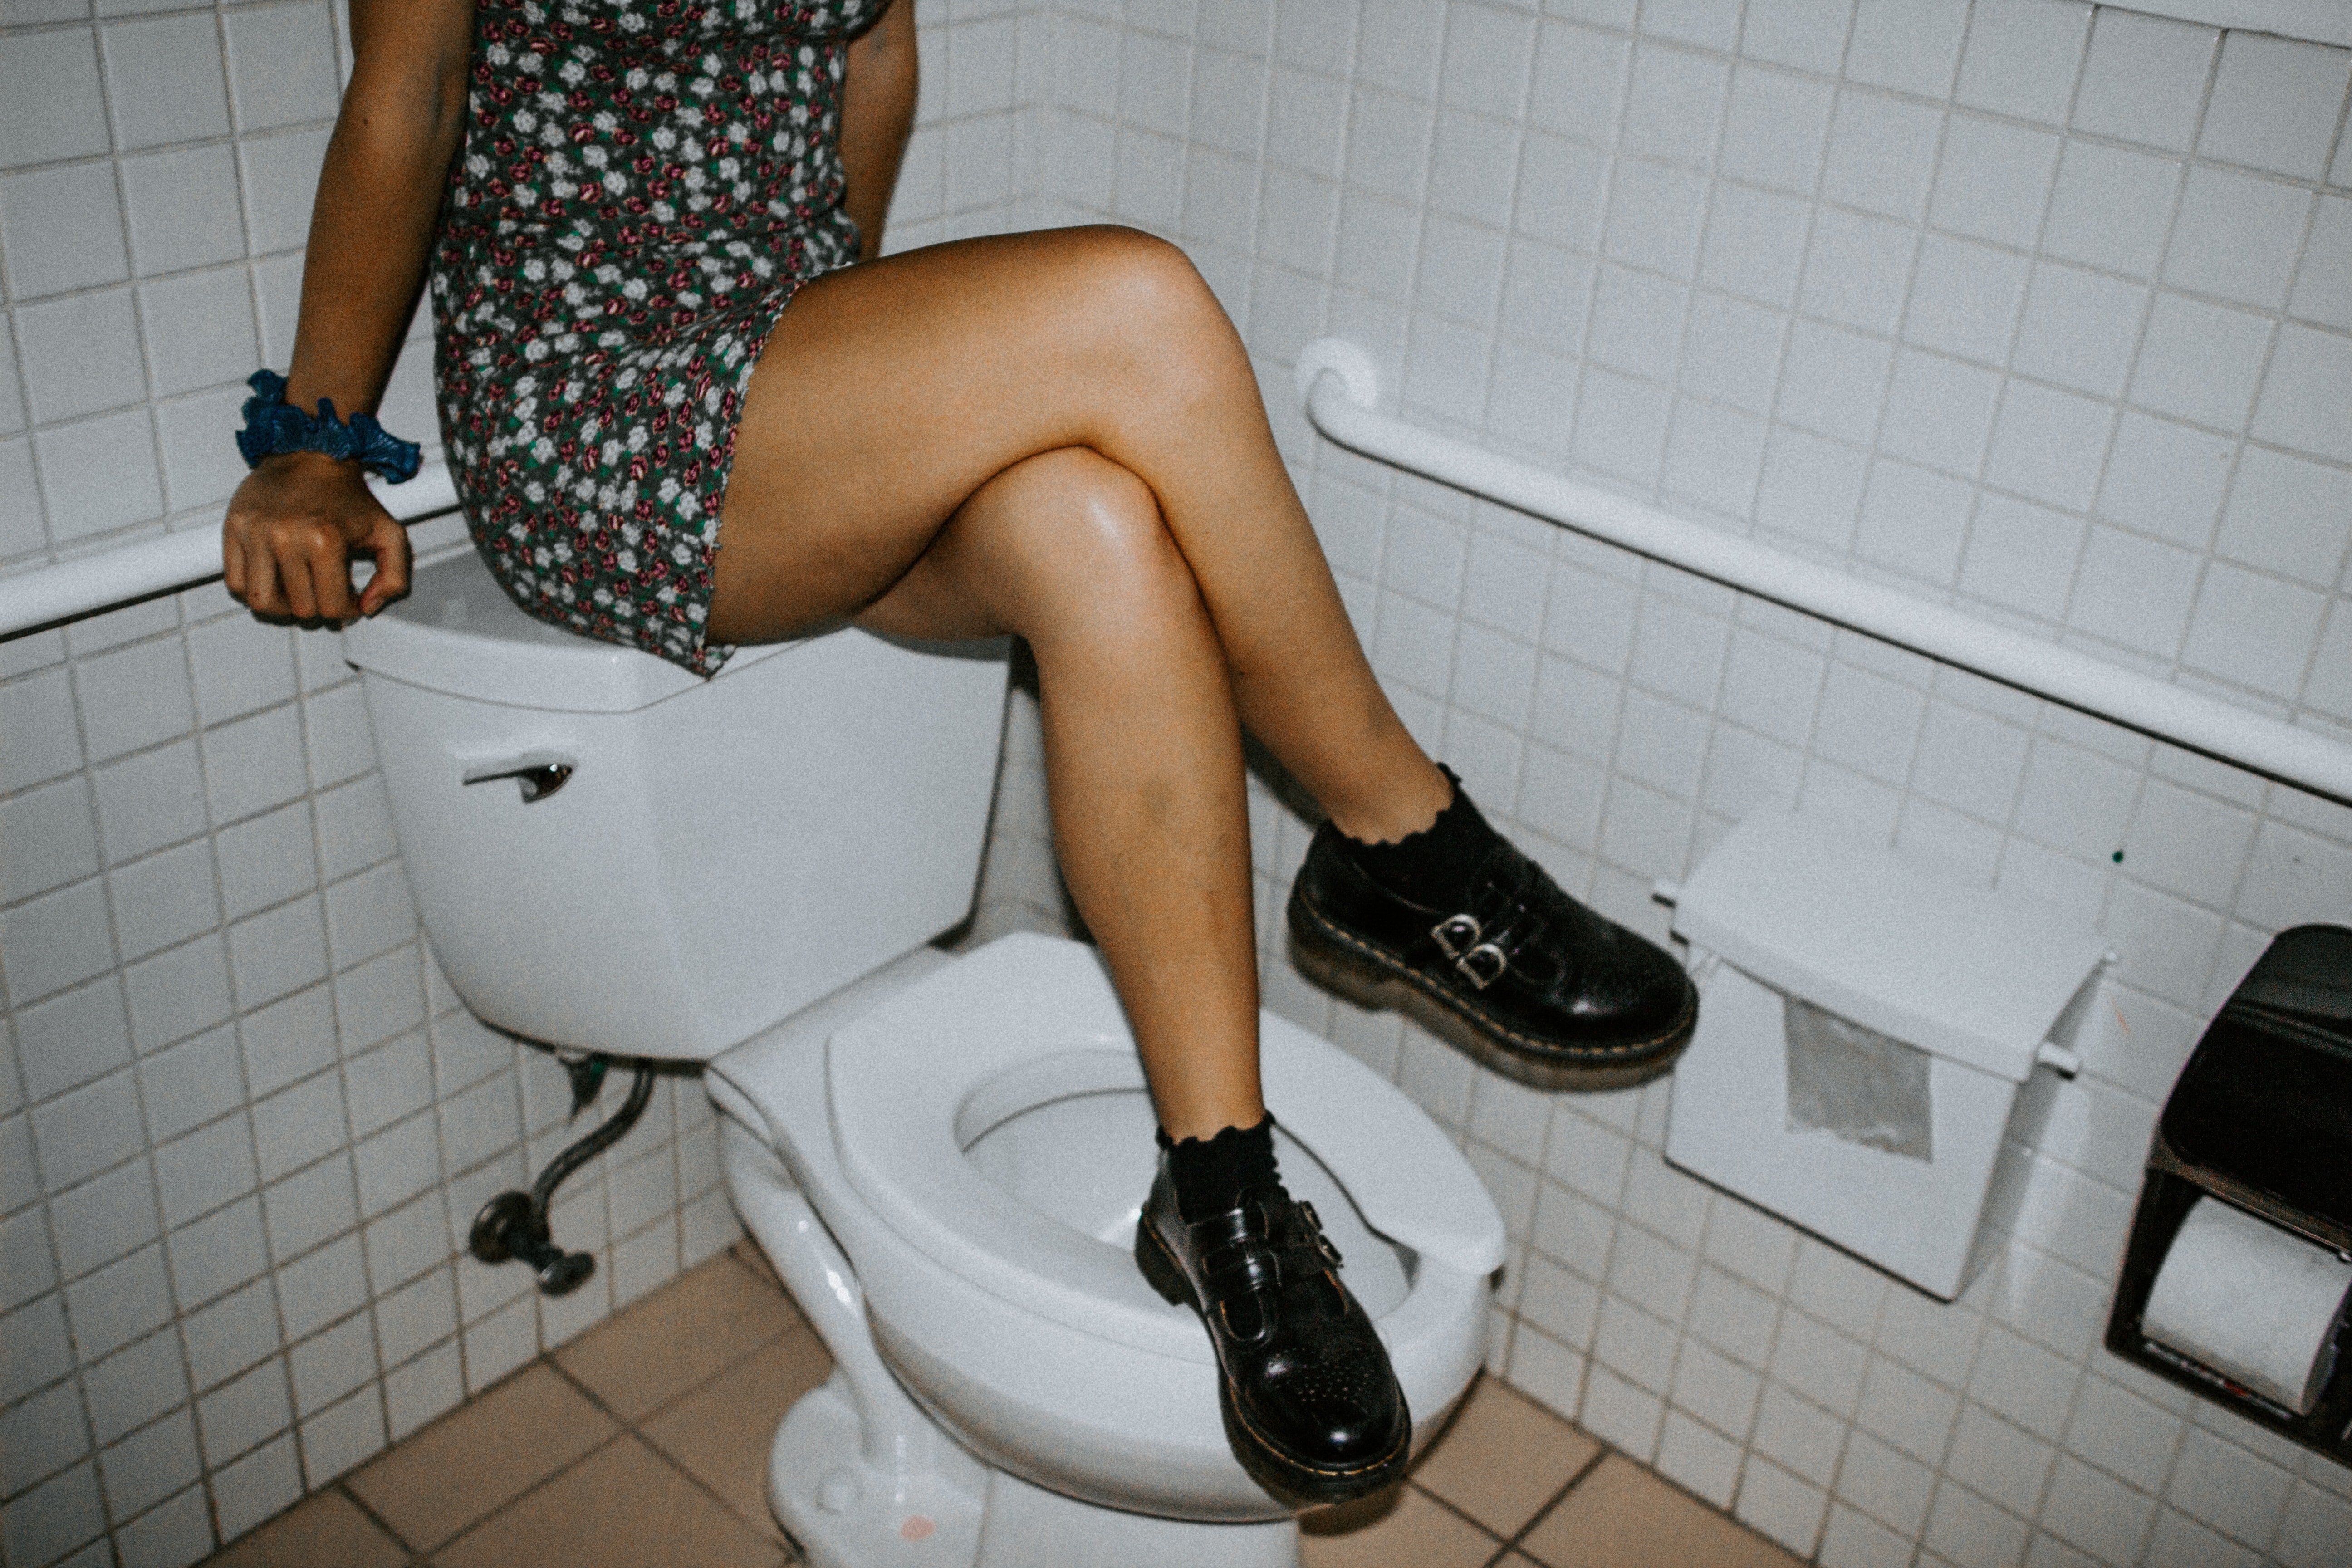 A woman in a dress and boots sitting on the tank of a toilet with her legs crossed. One foot is on the toilet seat. It's a weird place to sit! 